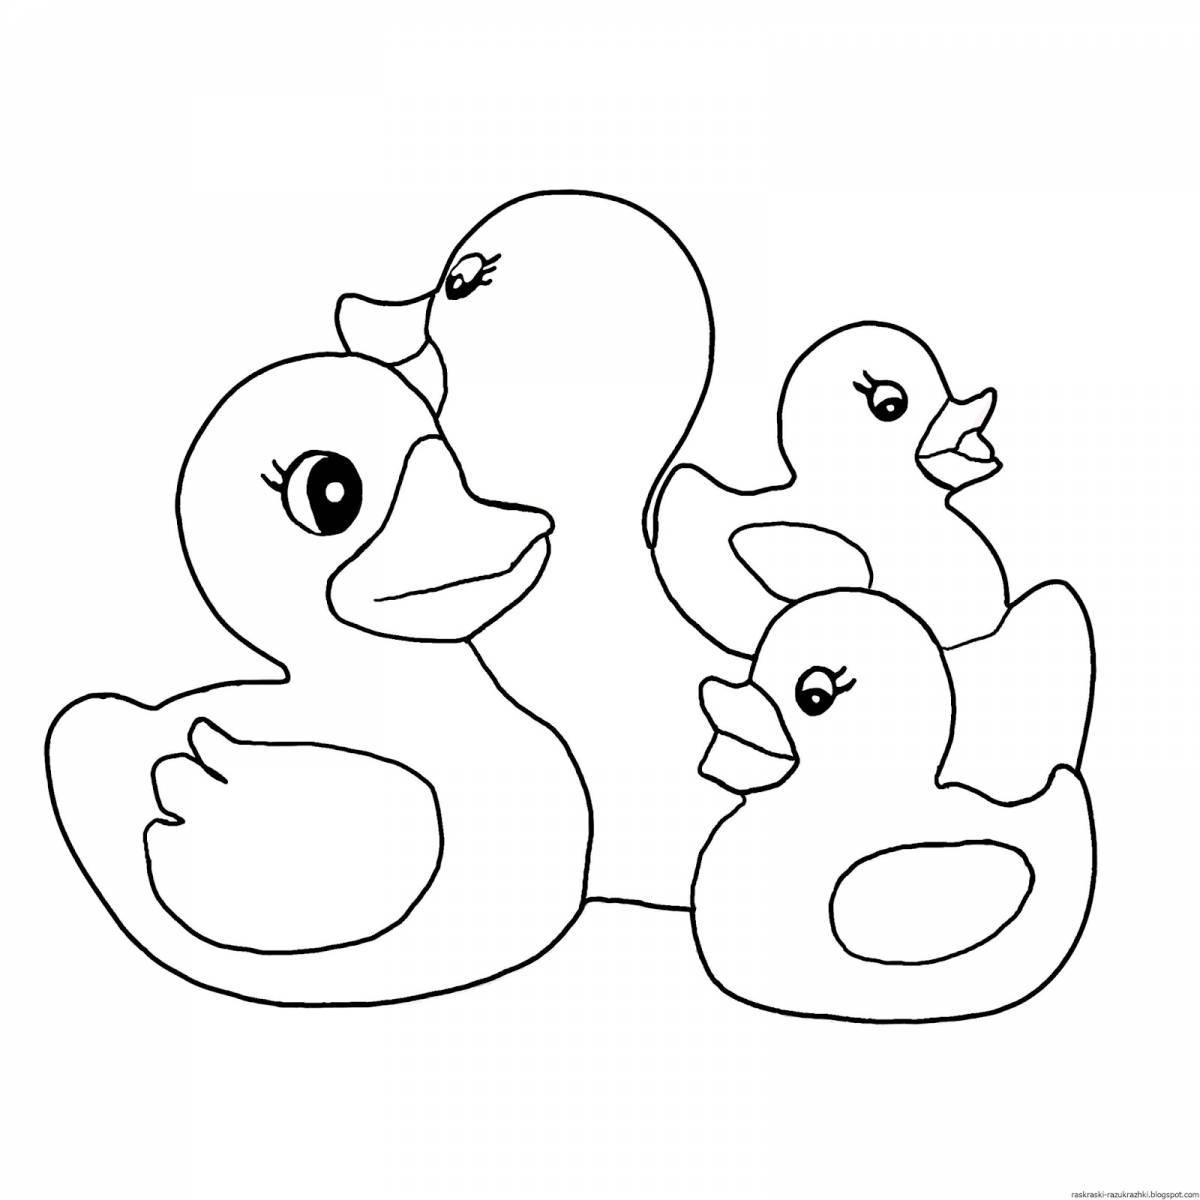 Adorable duckling coloring page for kids